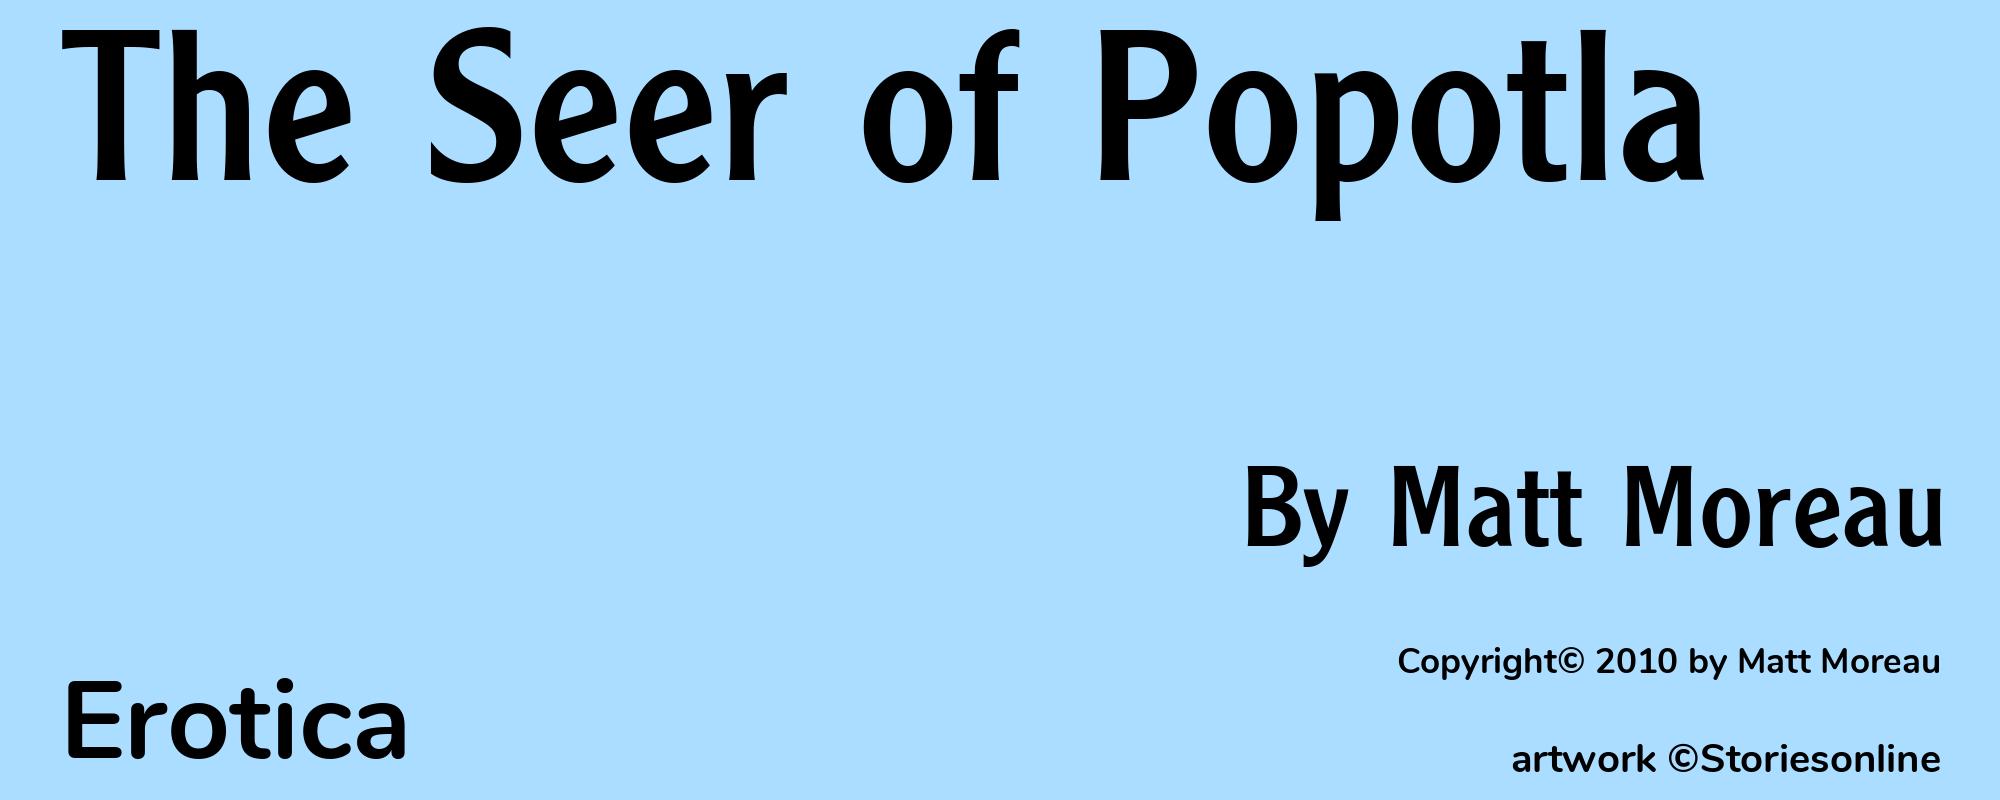 The Seer of Popotla - Cover